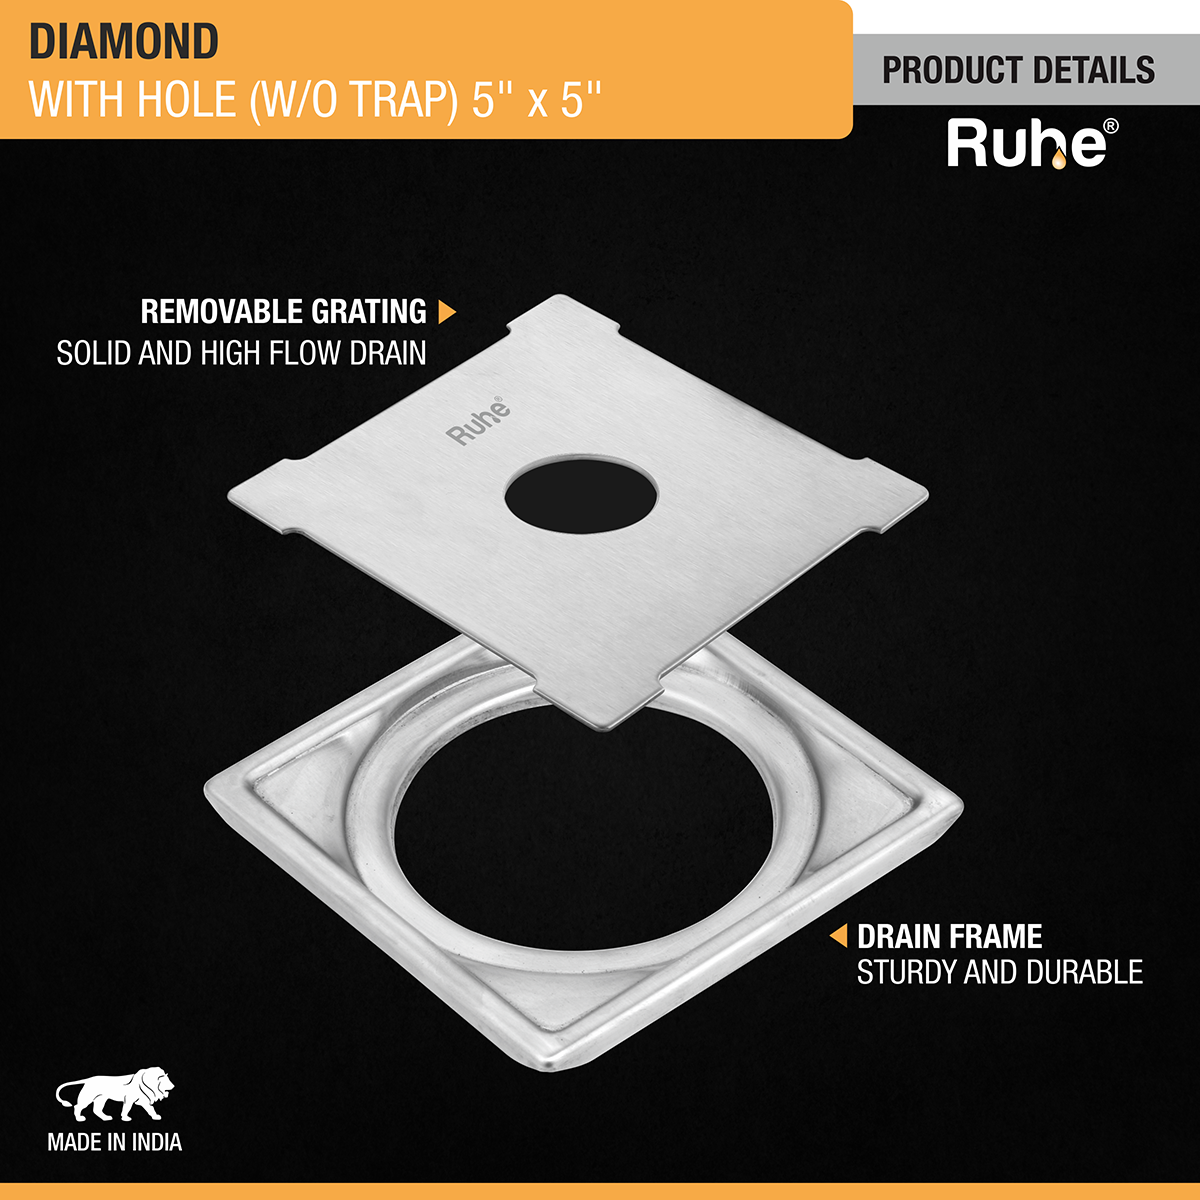 Diamond Square Floor Drain (5 x 5 Inches) with Hole (304 Grade) product details